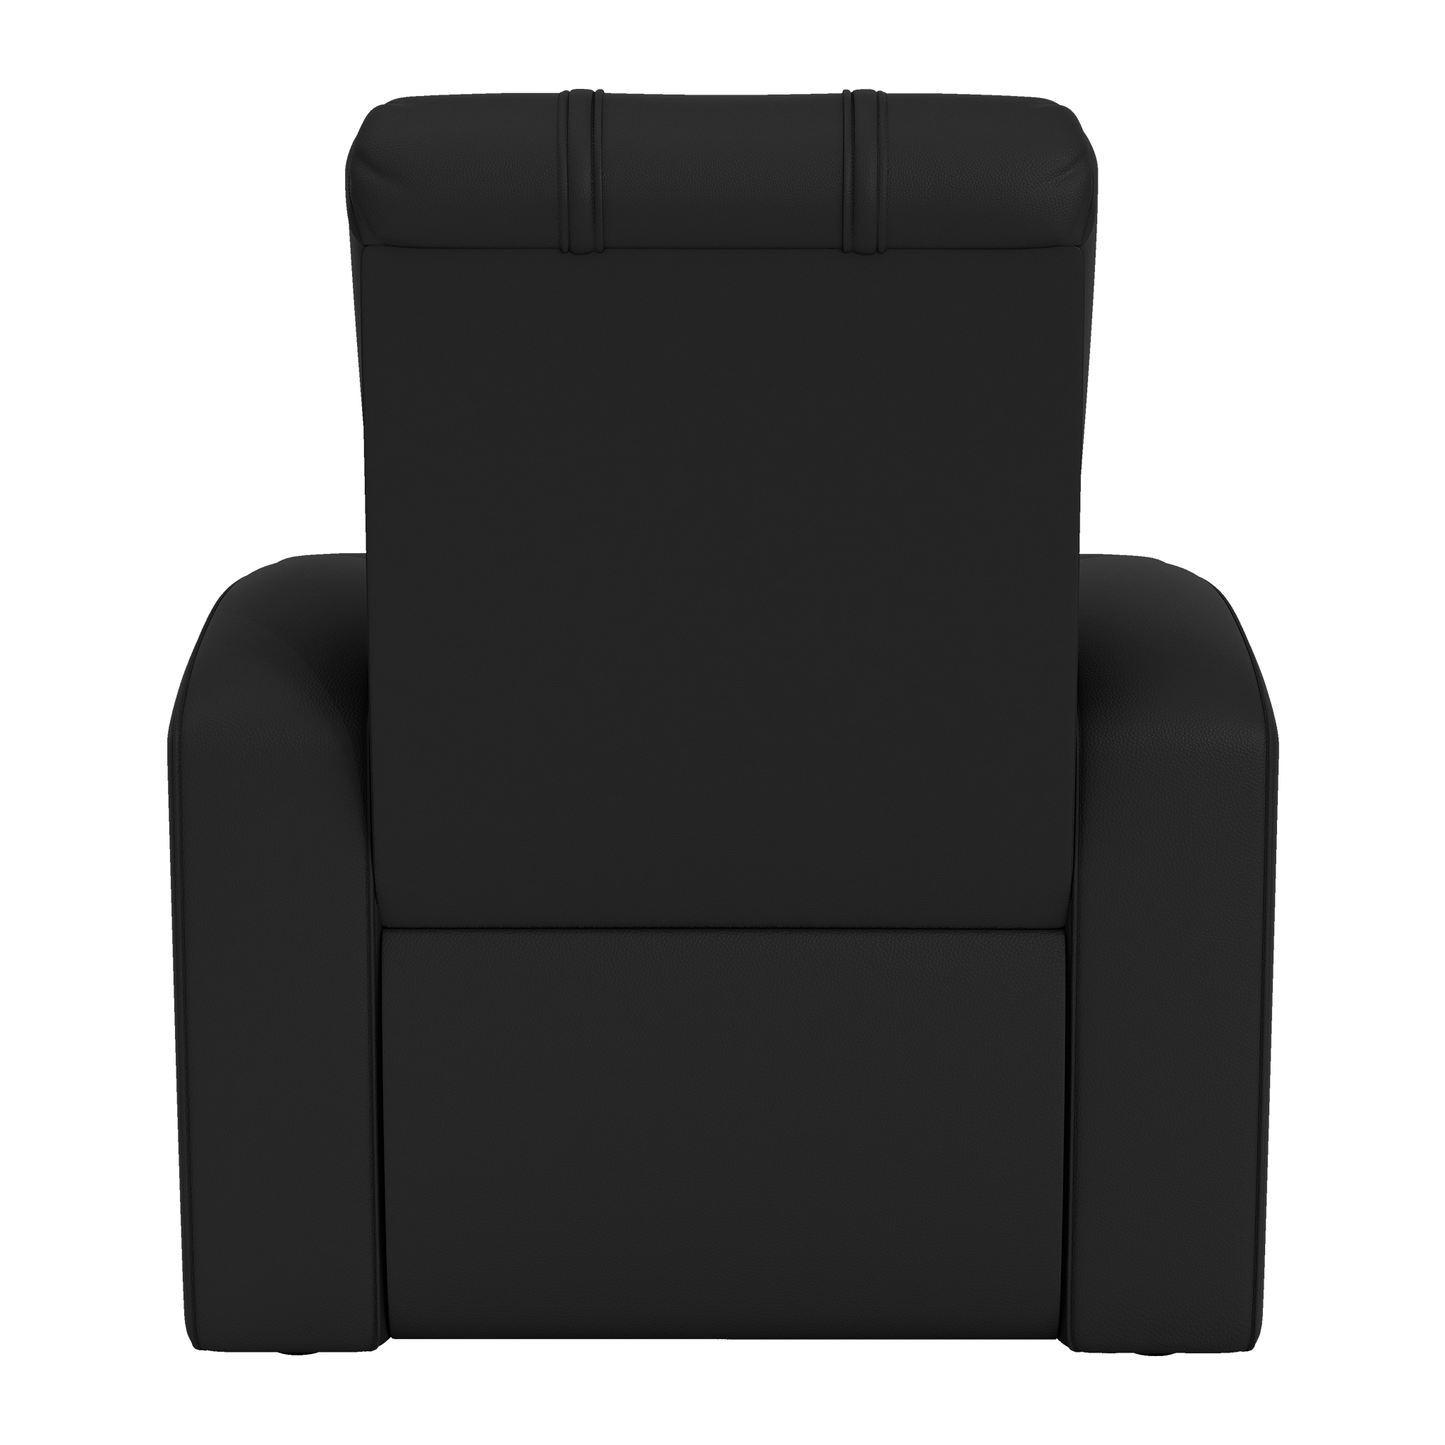 Relax Home Theater Recliner with Florida Panthers Logo